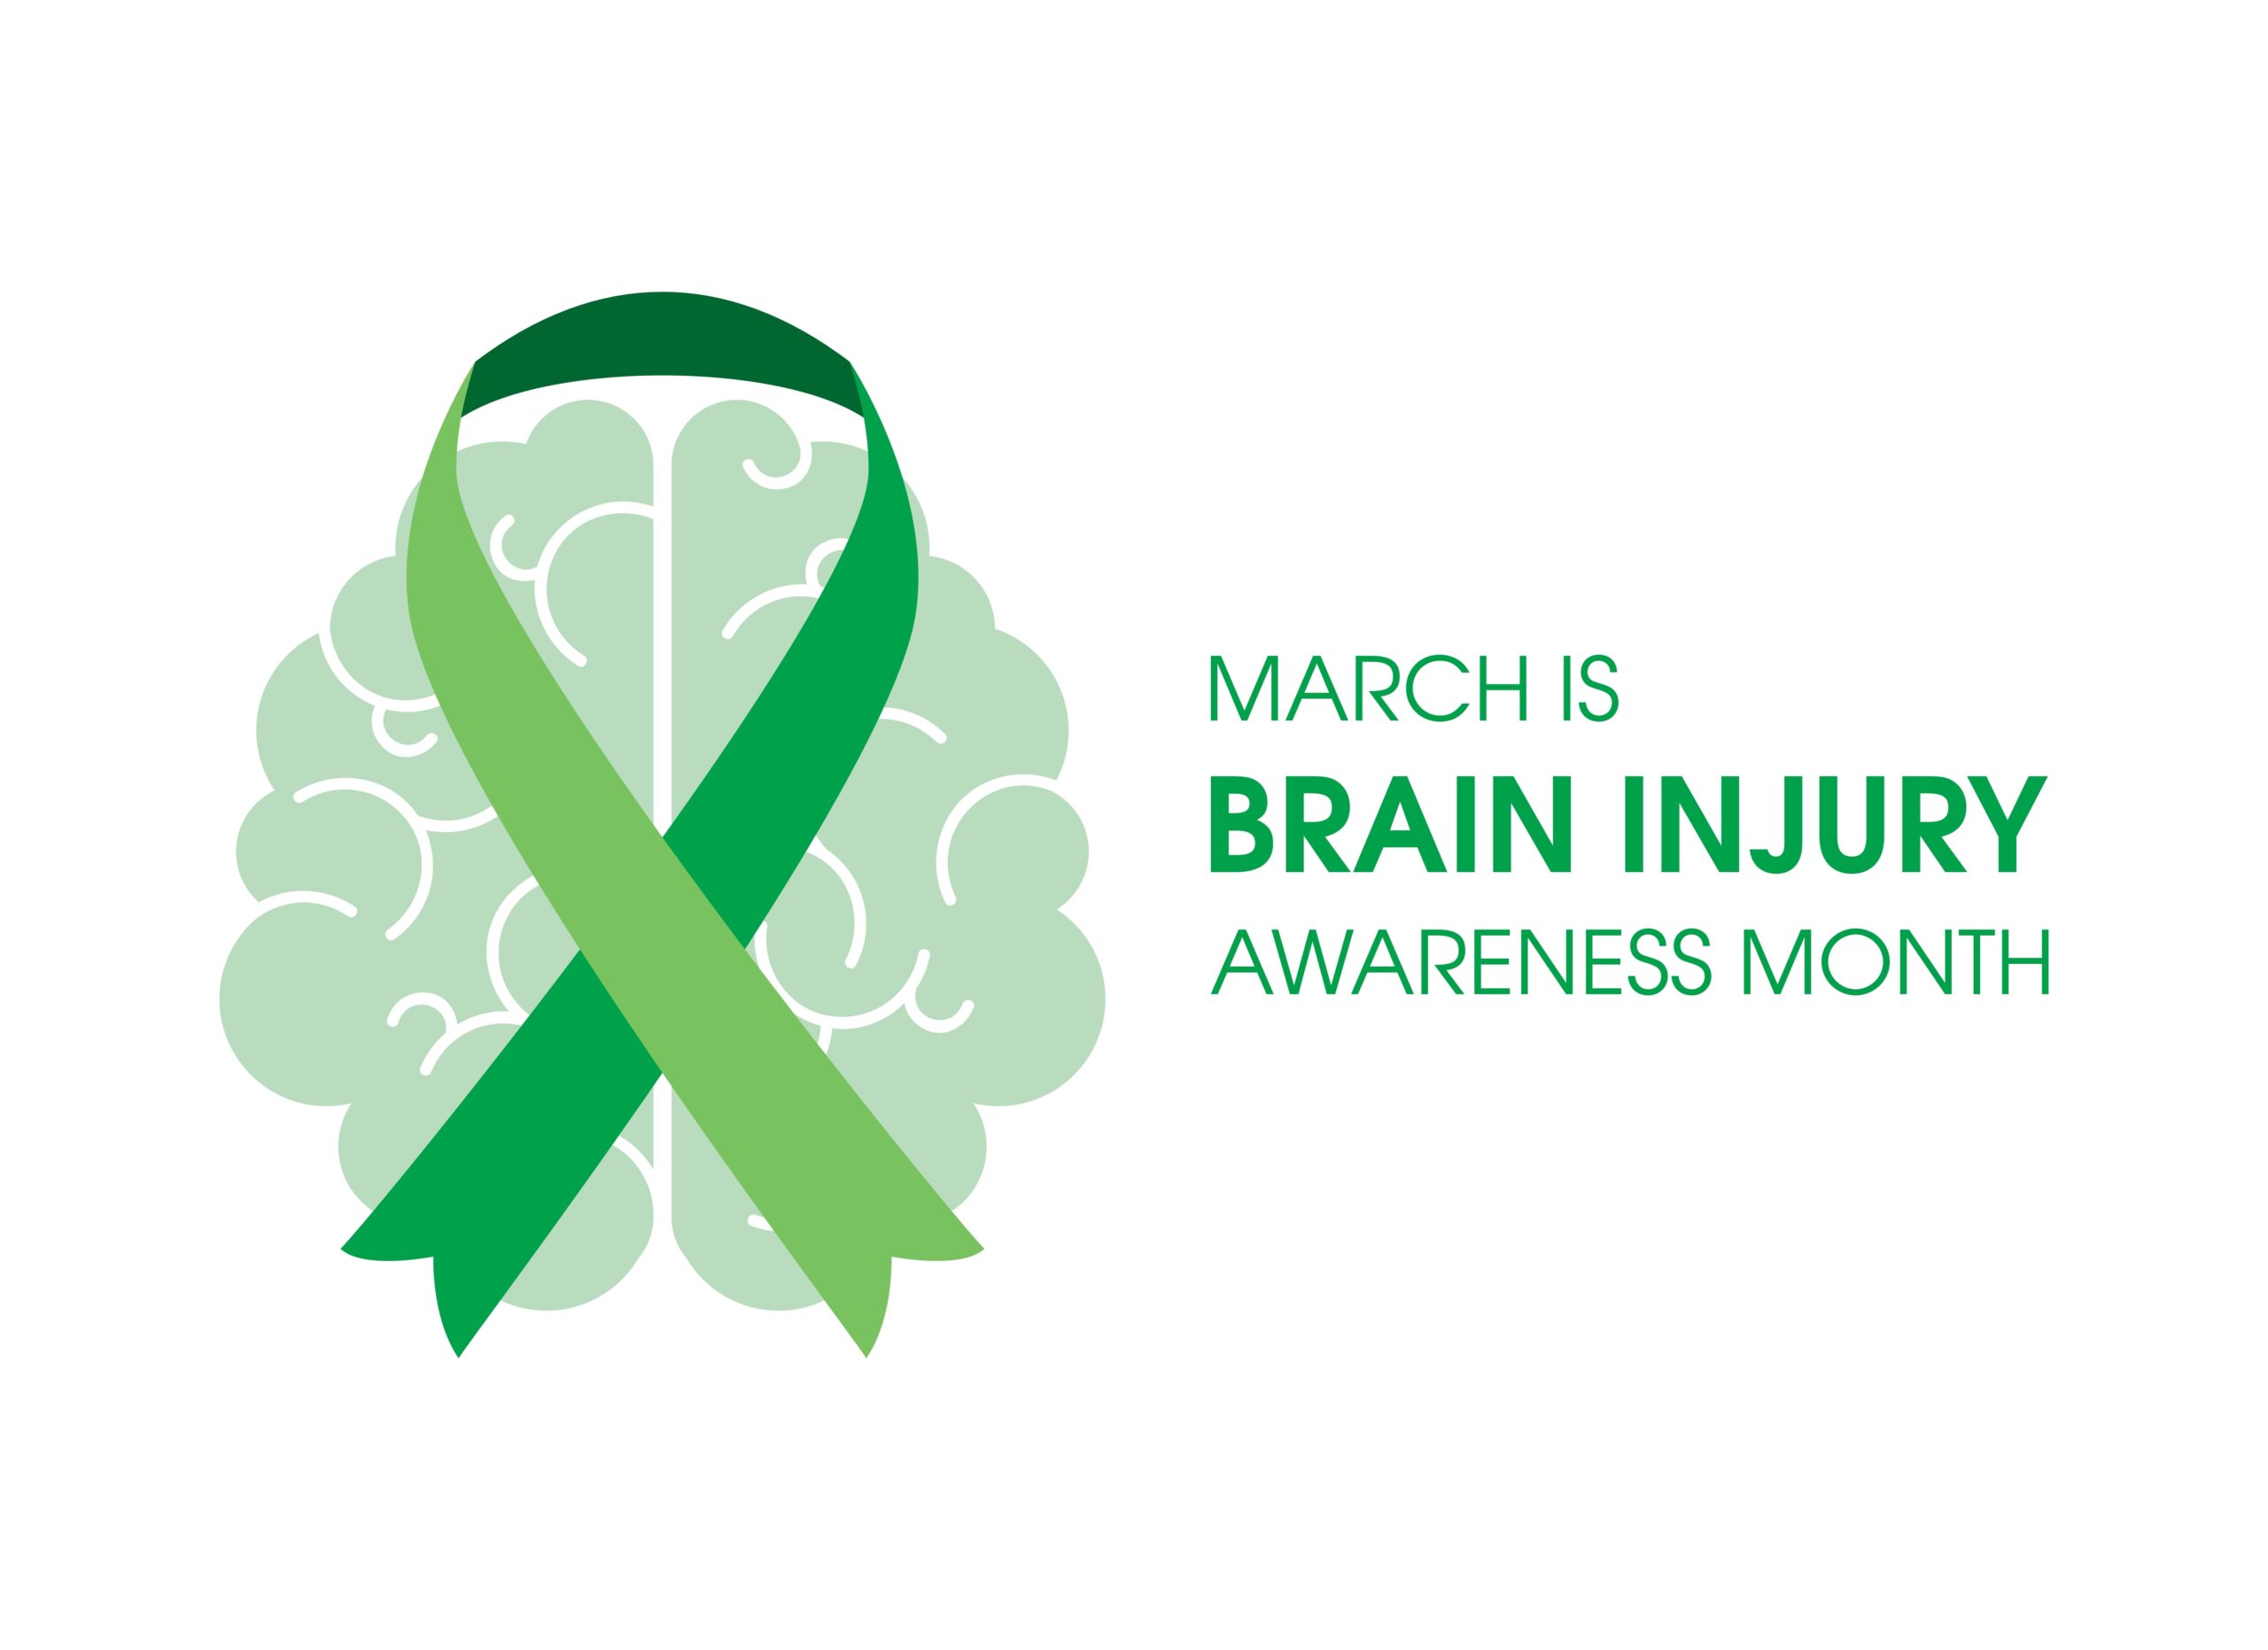 March is Brain Injury Awareness Month.